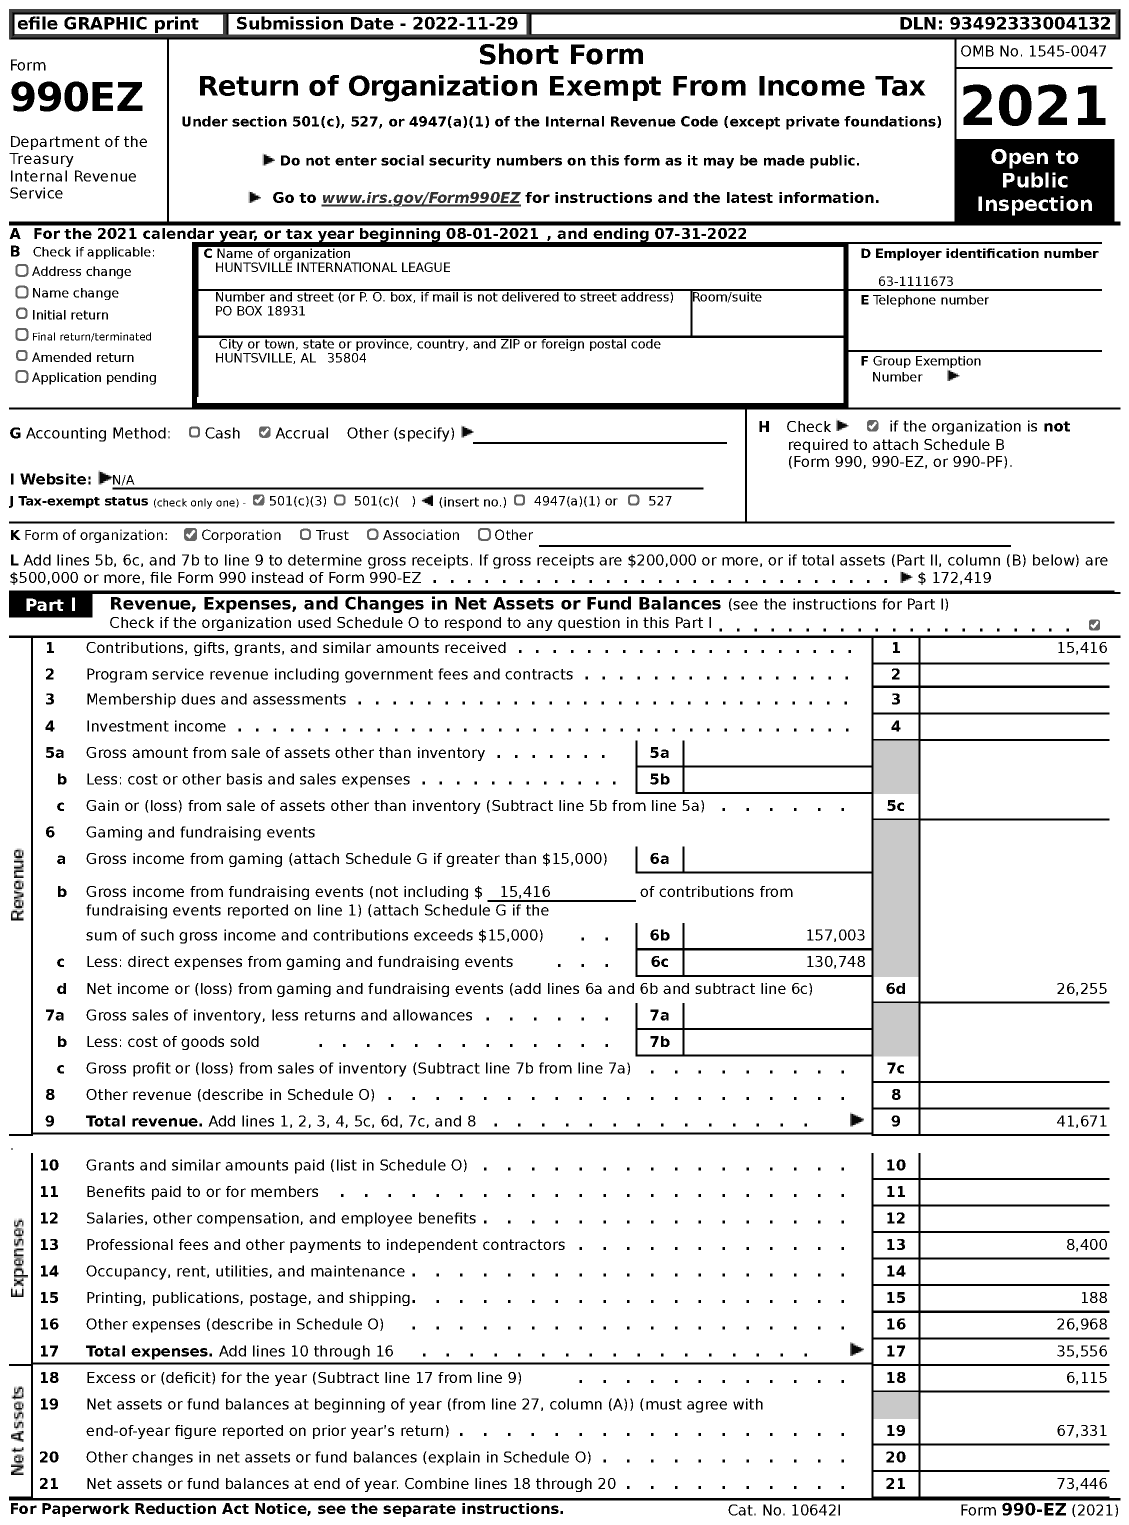 Image of first page of 2021 Form 990EZ for Little League Baseball - 3010805 Huntsville International LL